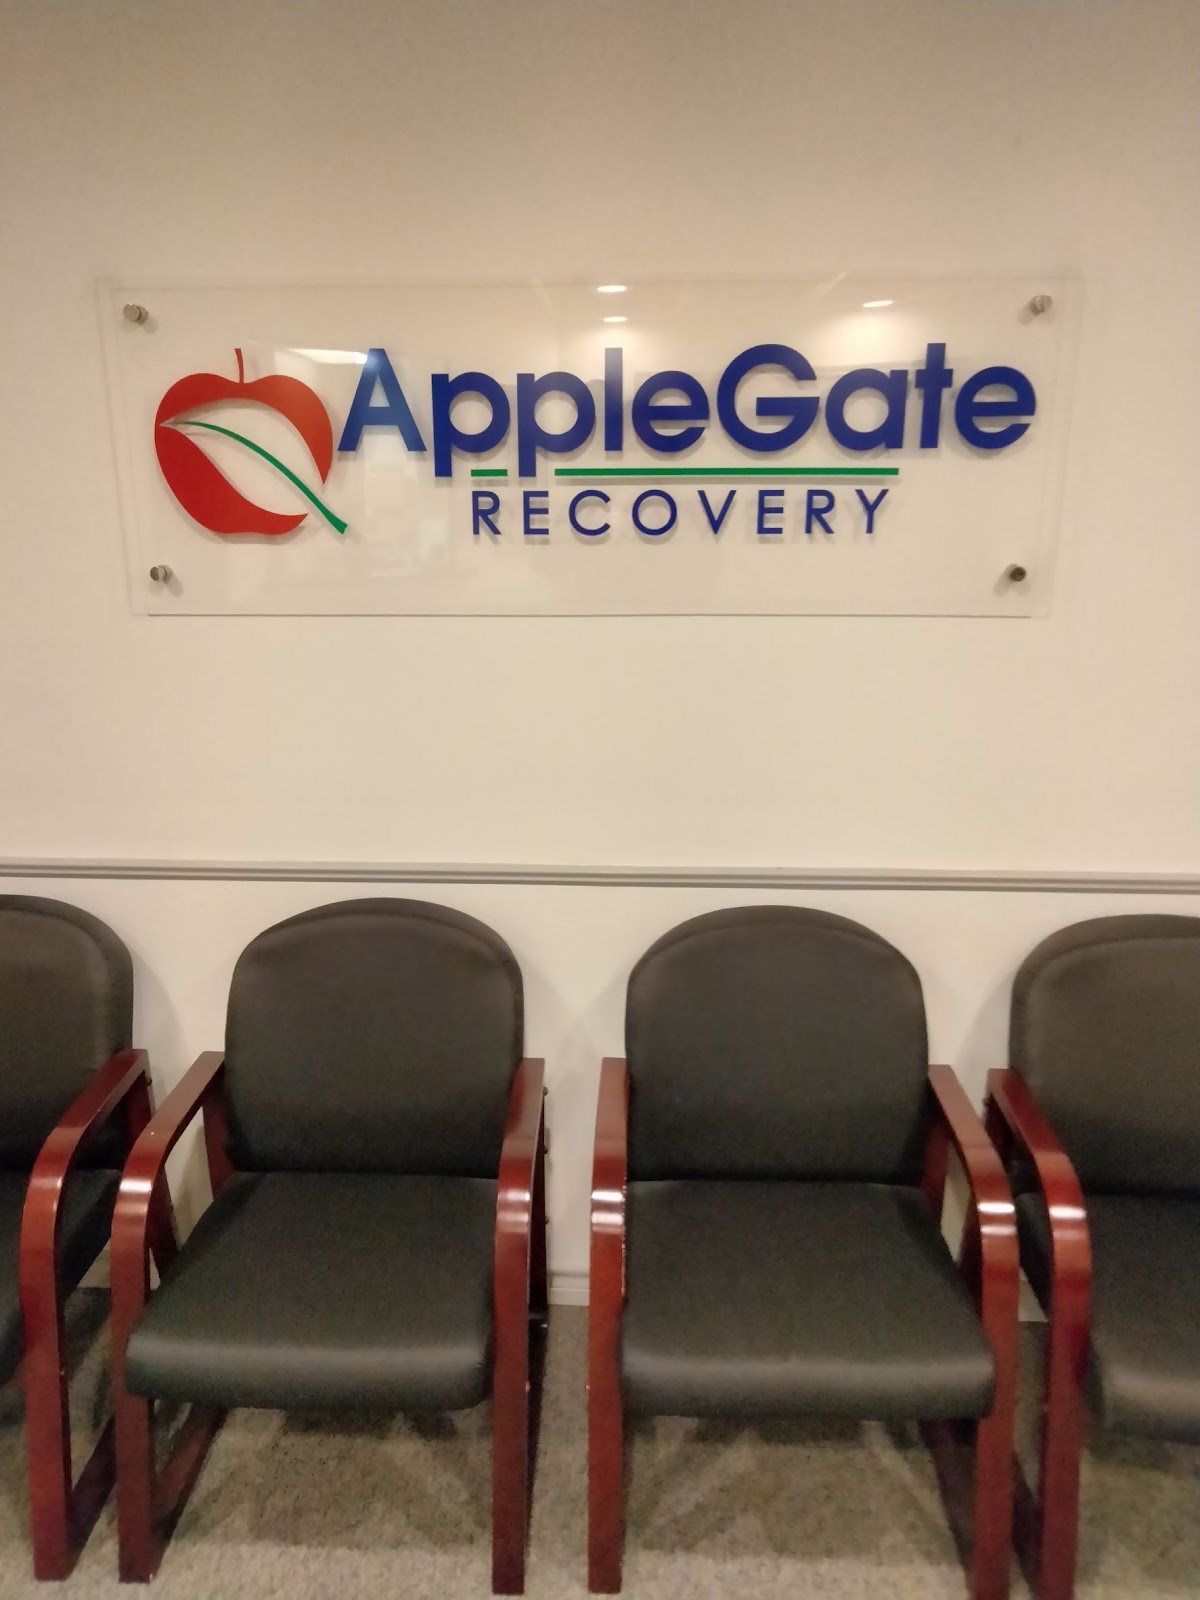 AppleGate Recovery